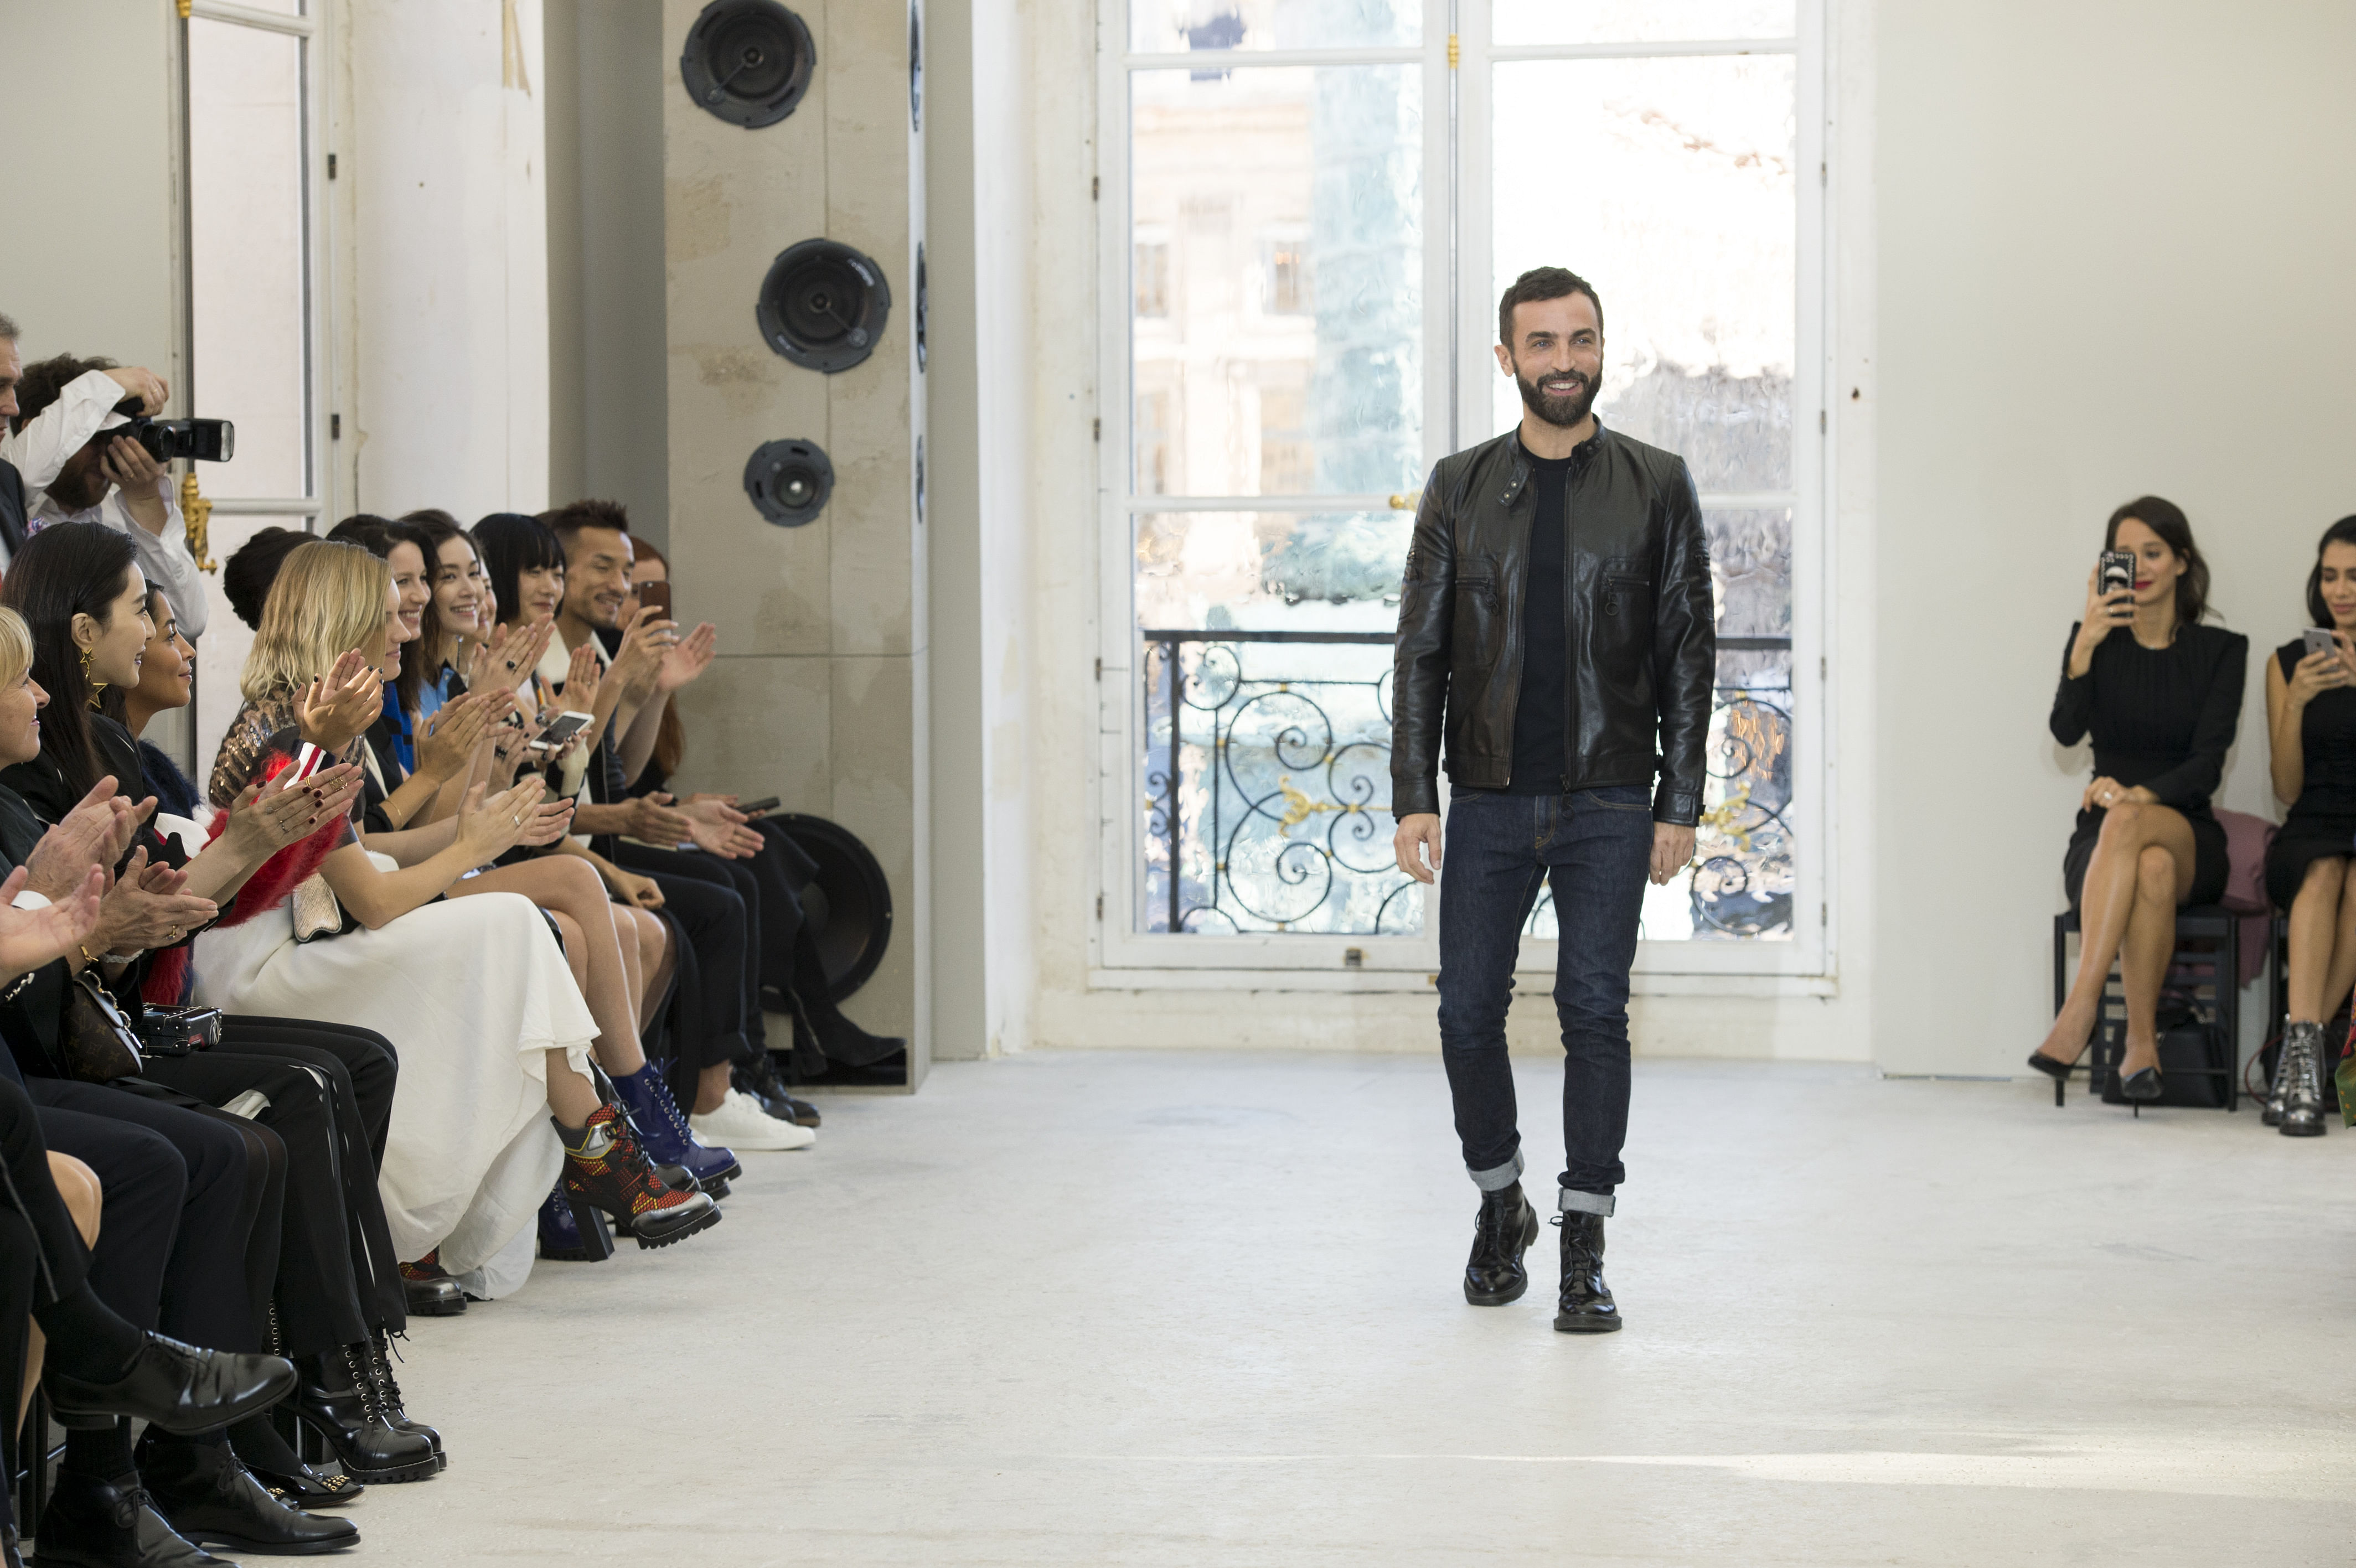 The bold and beautiful looks of Nicolas Ghesquière